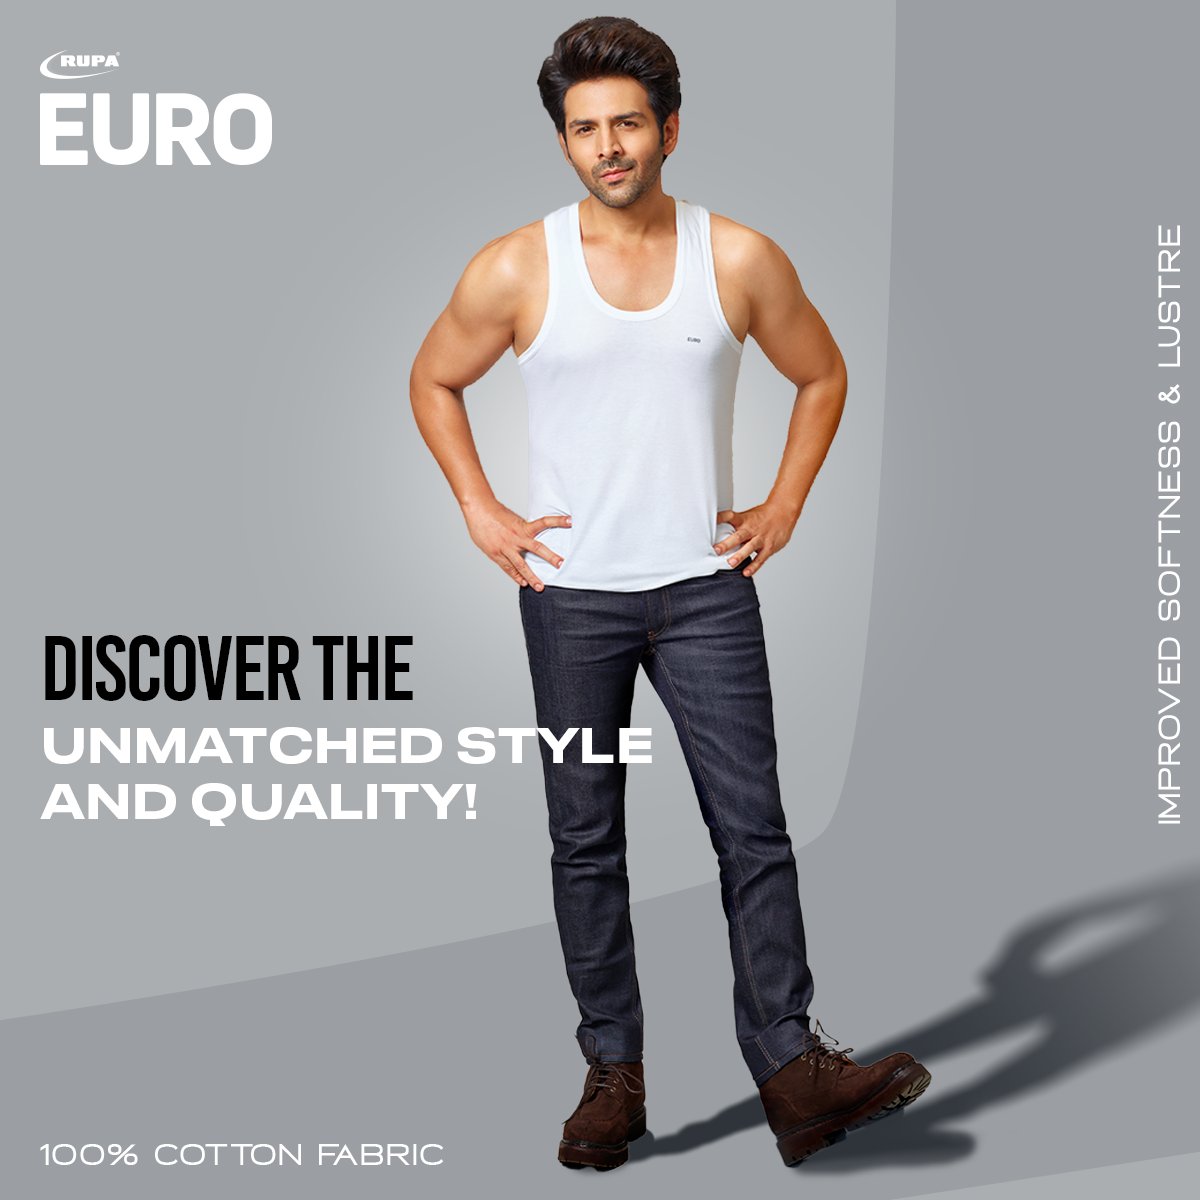 Embracing inner fashion – a quality that brings out the HEURO in you 😎
Kyunki Yeh #ChumbakHaiBhai

Explore collections at bit.ly/3Q7zfK1

#Euro #styling #StylishInnerWears #KartikAaryan #EuroWithKartik #NewArrivals2024 #ComfortFirst #ComfortInnerWears